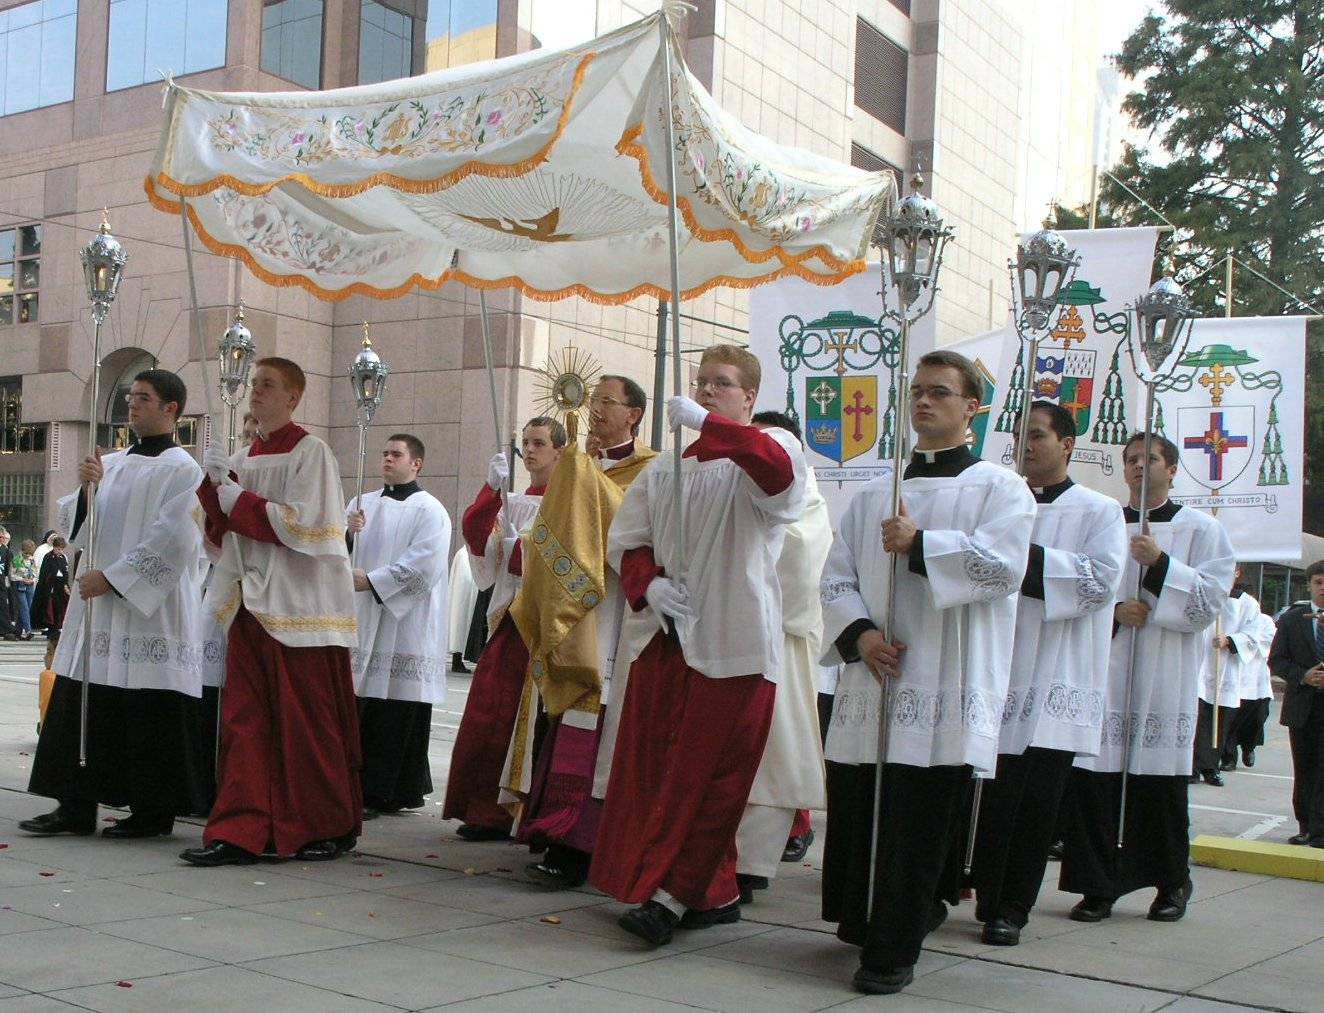 blessed_sacrament_procession-_first_annual_southeastern_eucharistic_congress-_charlotte-_north-jpg.556128